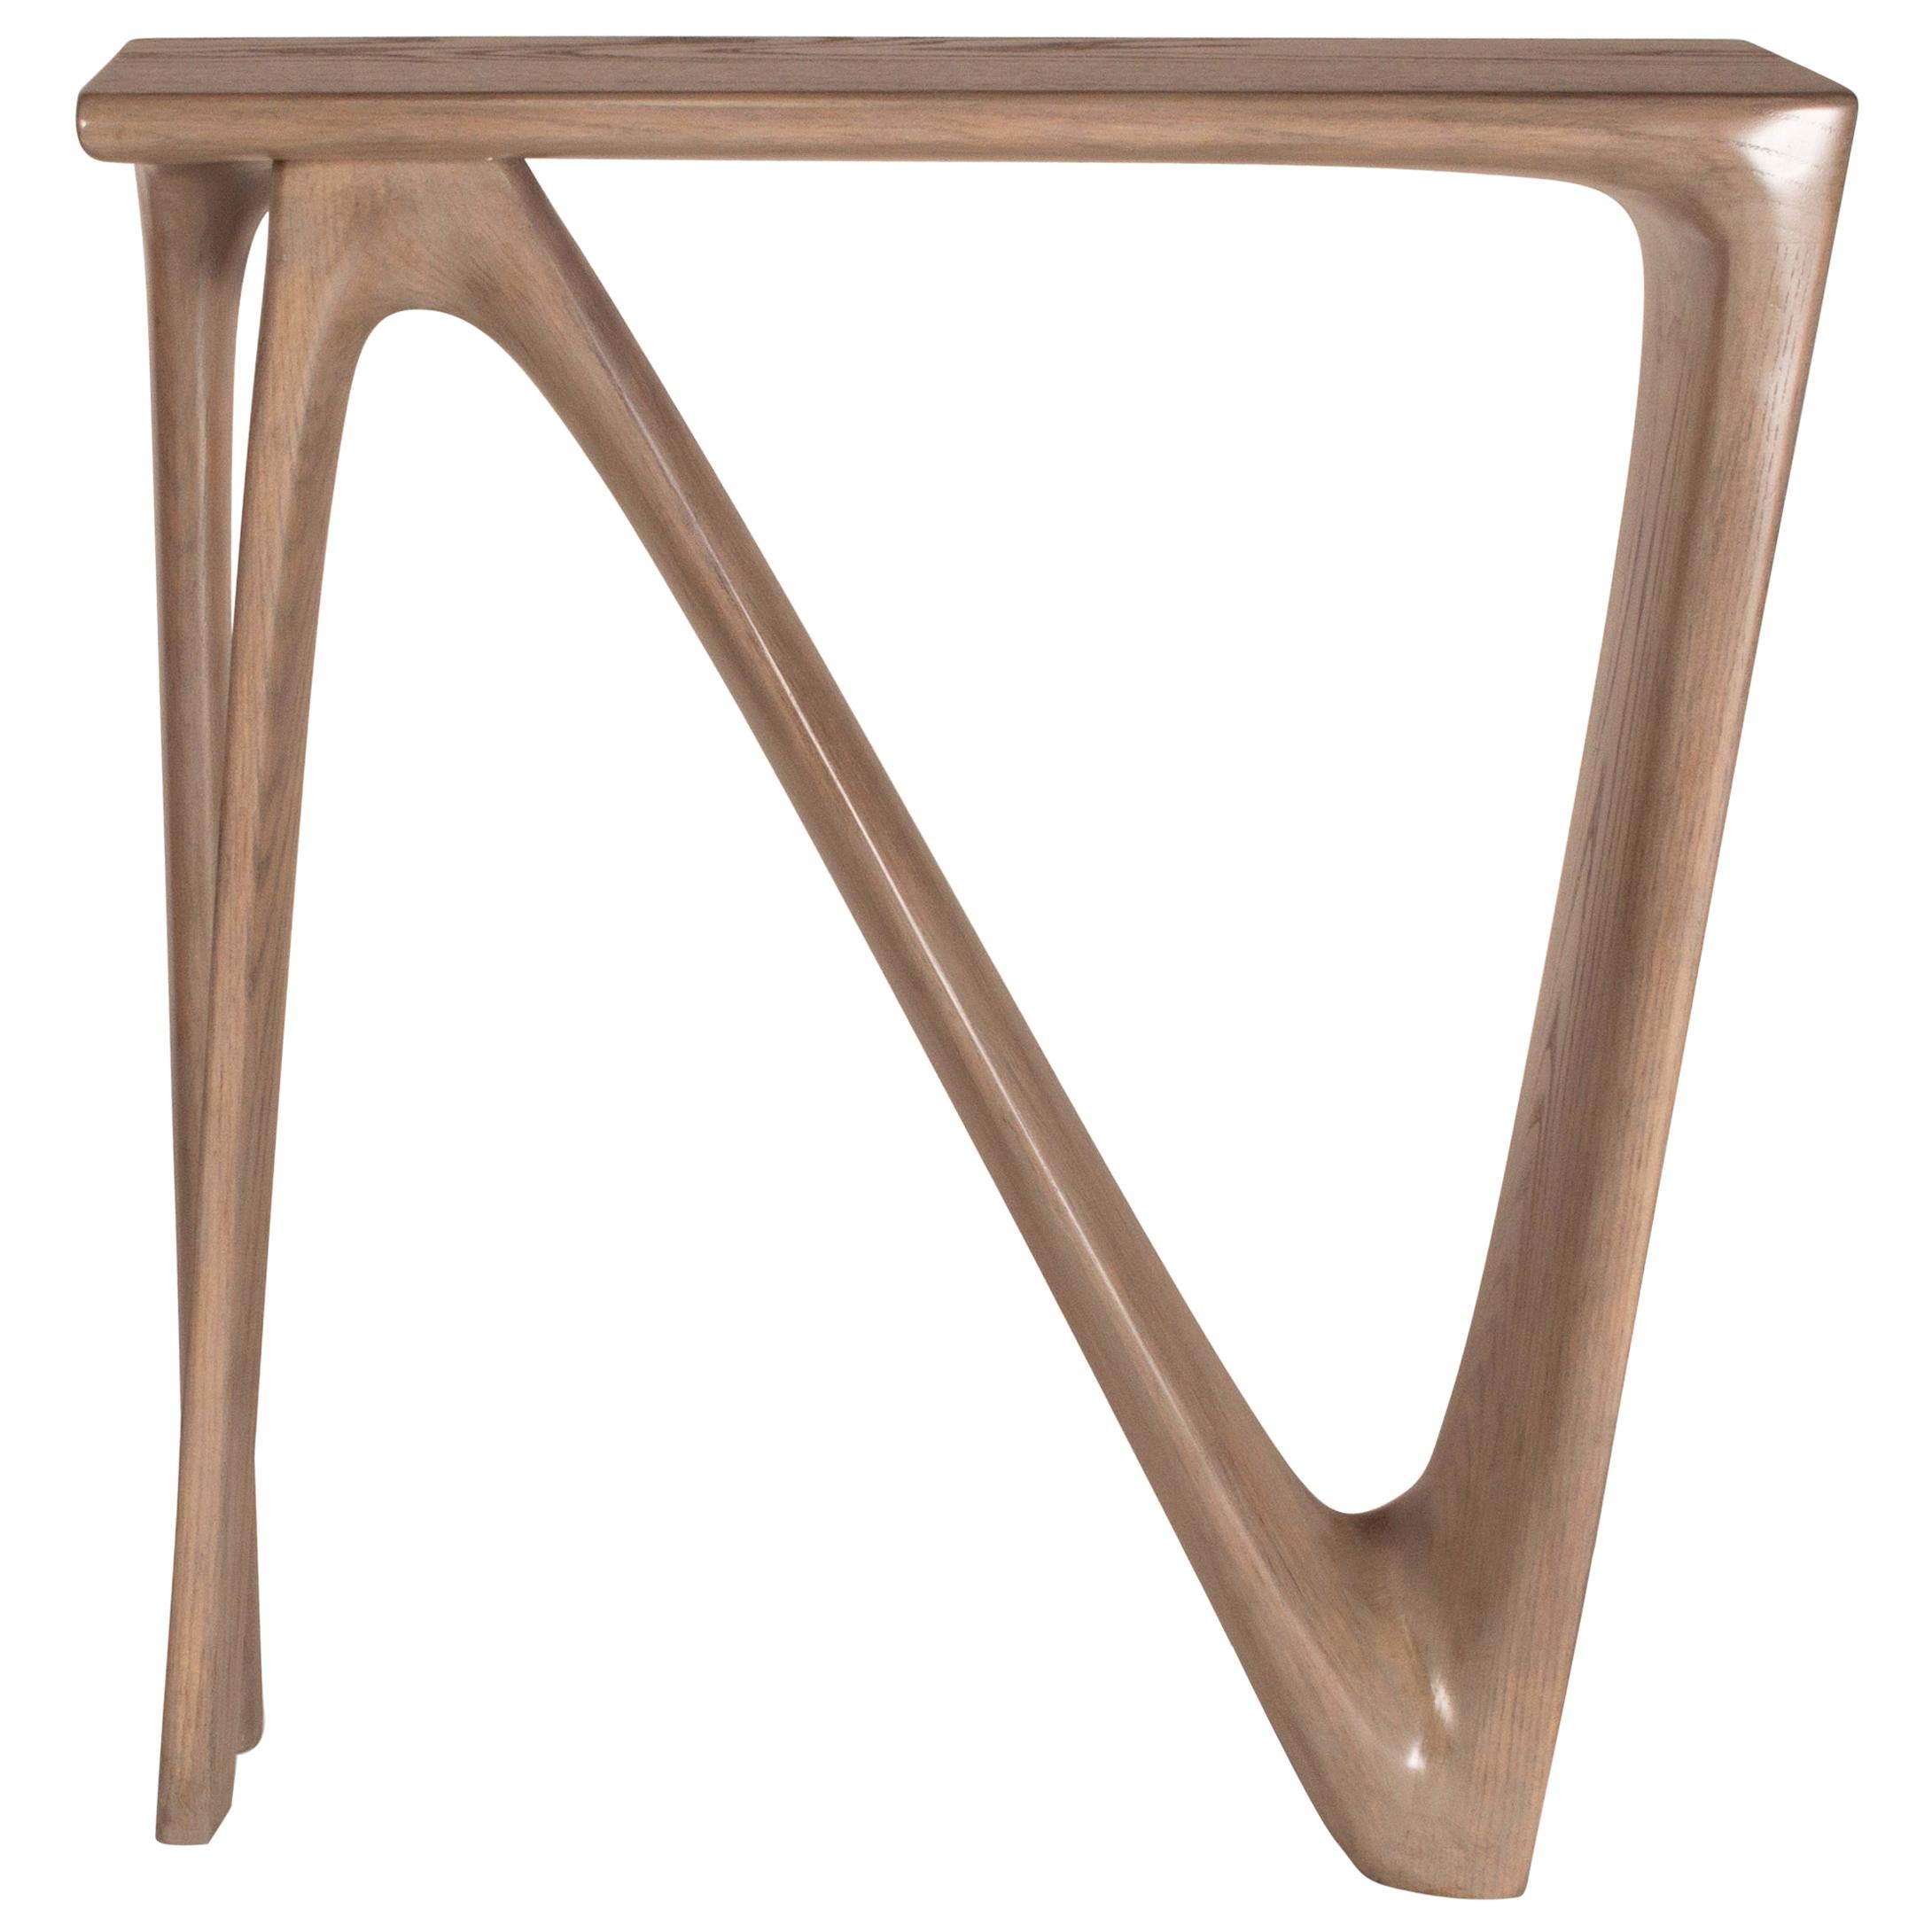 Amorph Astra Console Table Gray Oak Stain on Ash wood